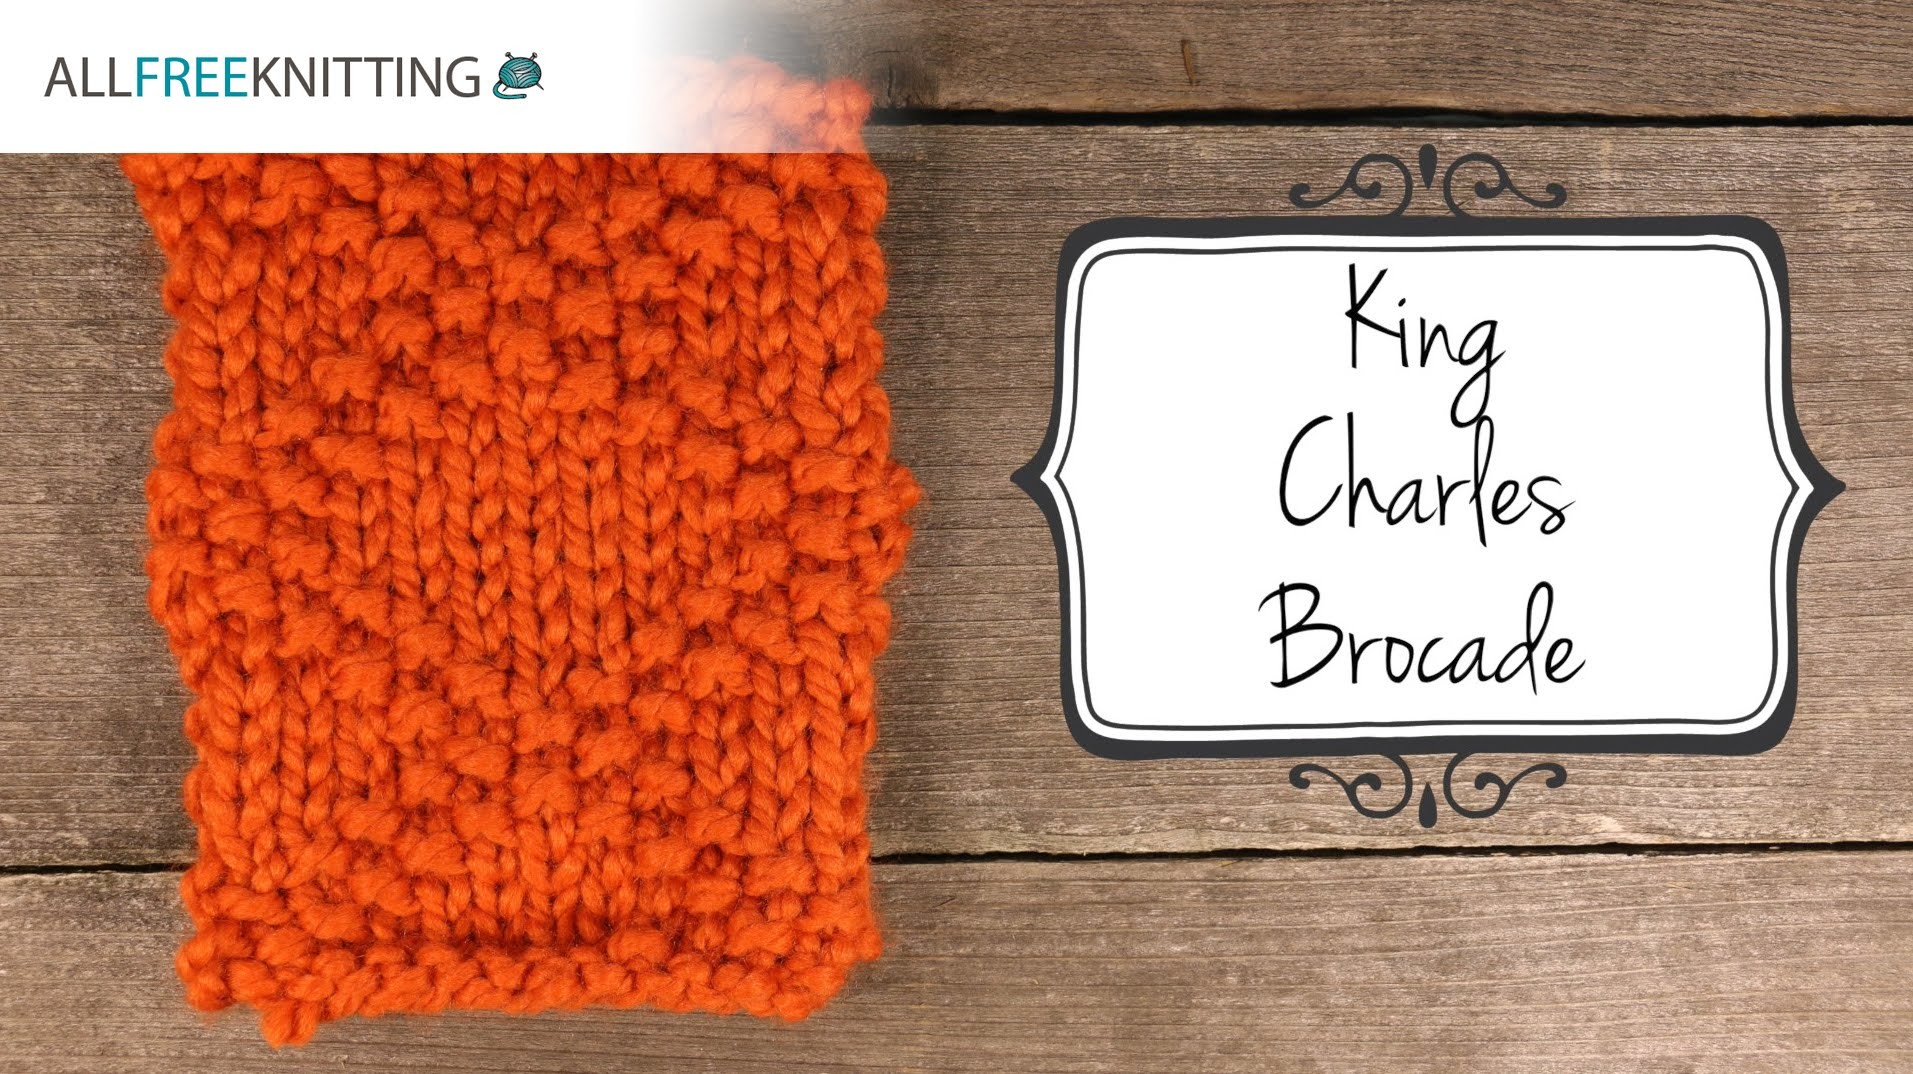 How to Knit the King Charles Brocade Stitch